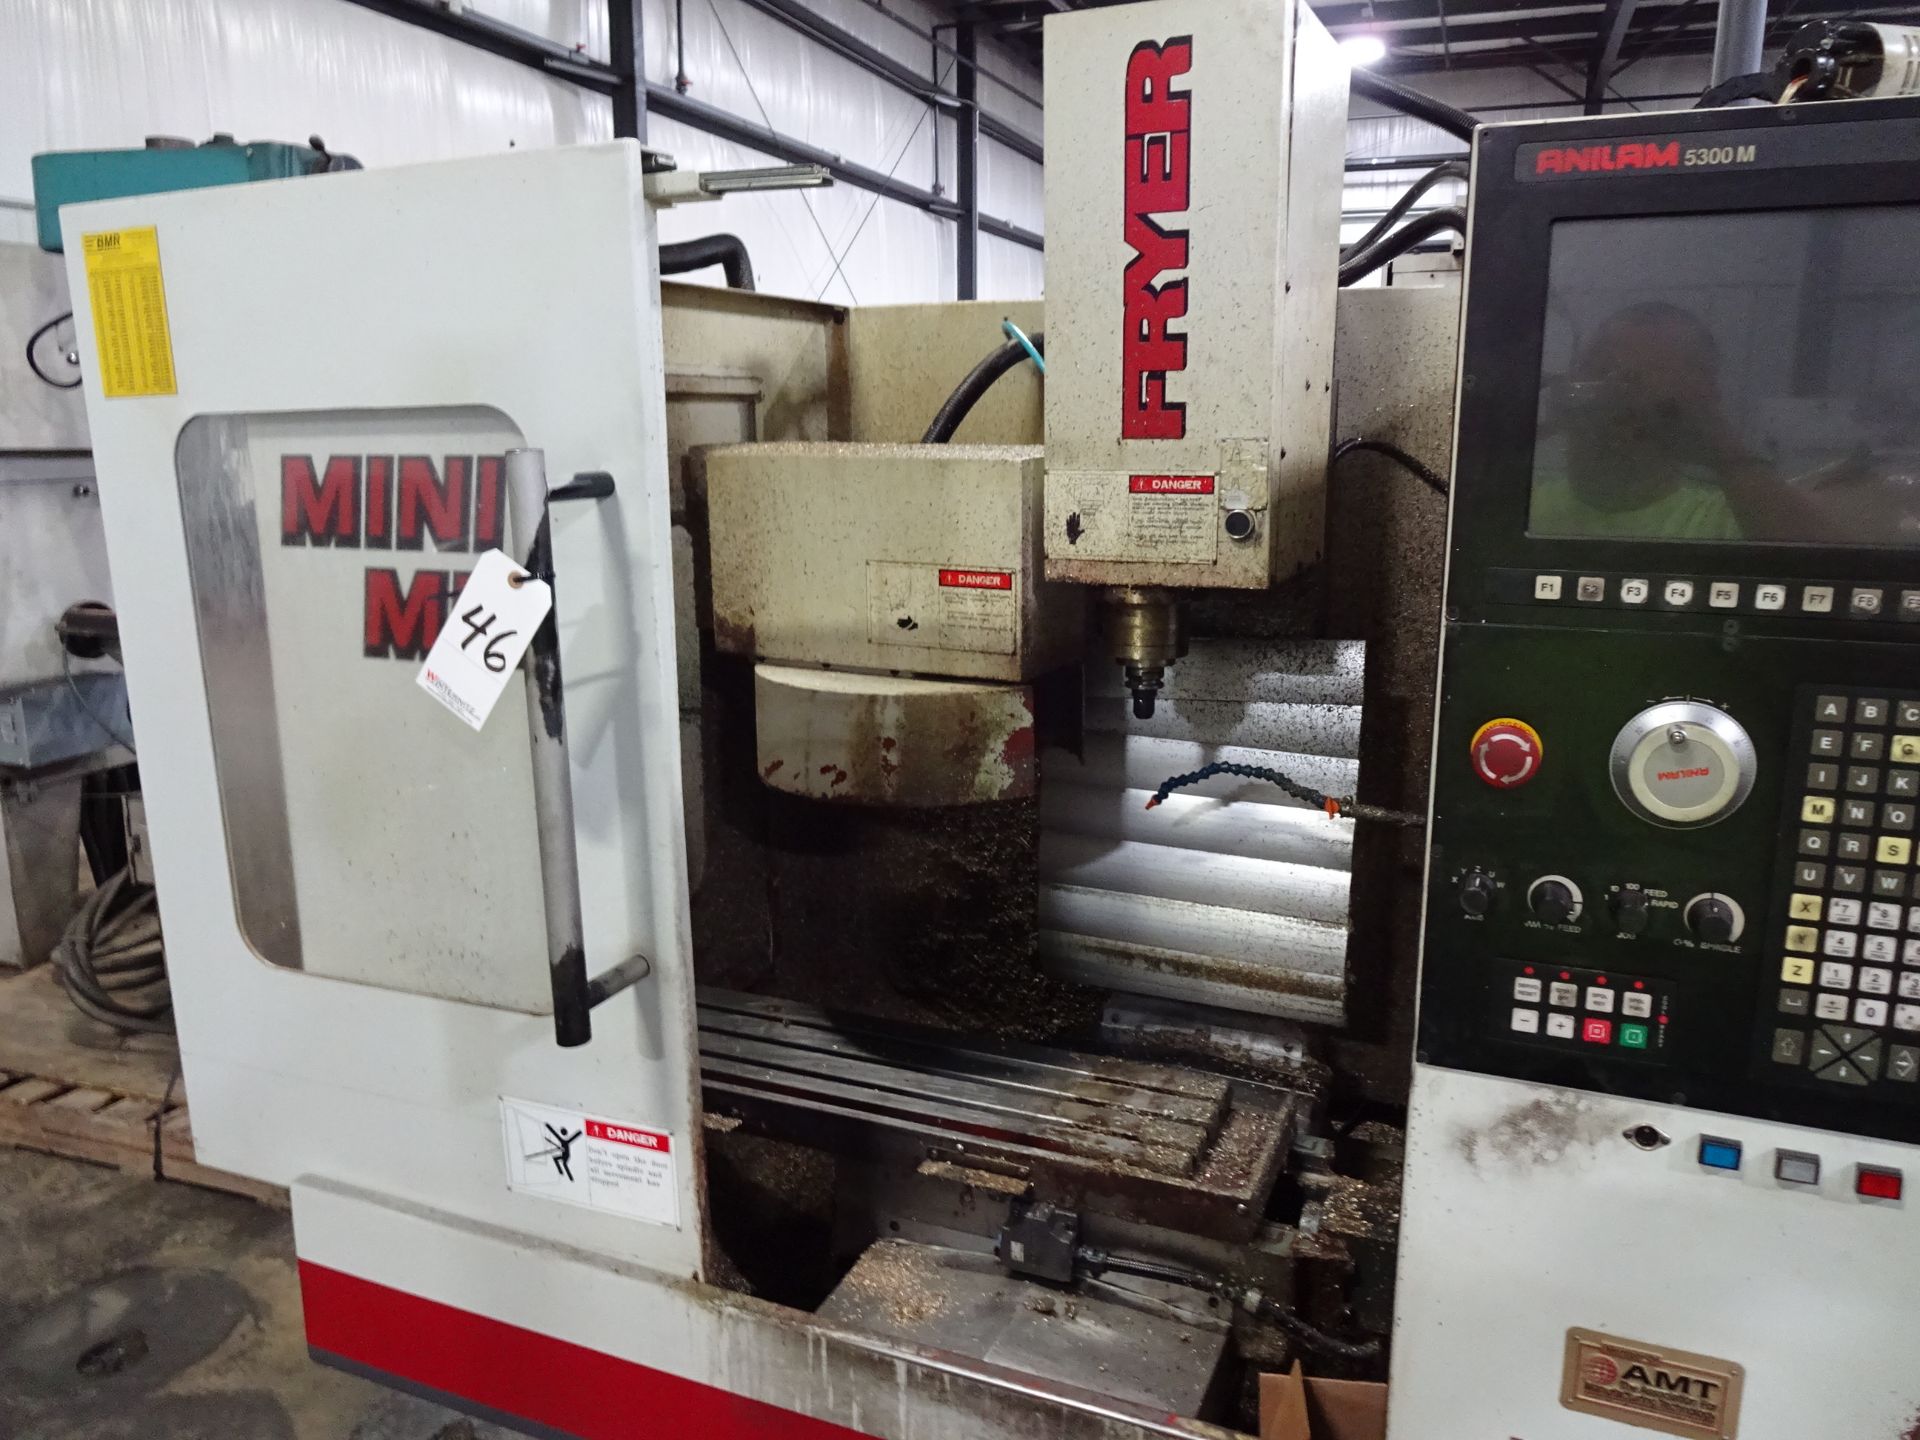 FRYER MODEL MM CNC MINI MILL, S/N 25022, 10 X 33 TABLE, ANILAM 5300M CONTROL (EXCLUDES TRANSFORMER) - Image 3 of 13